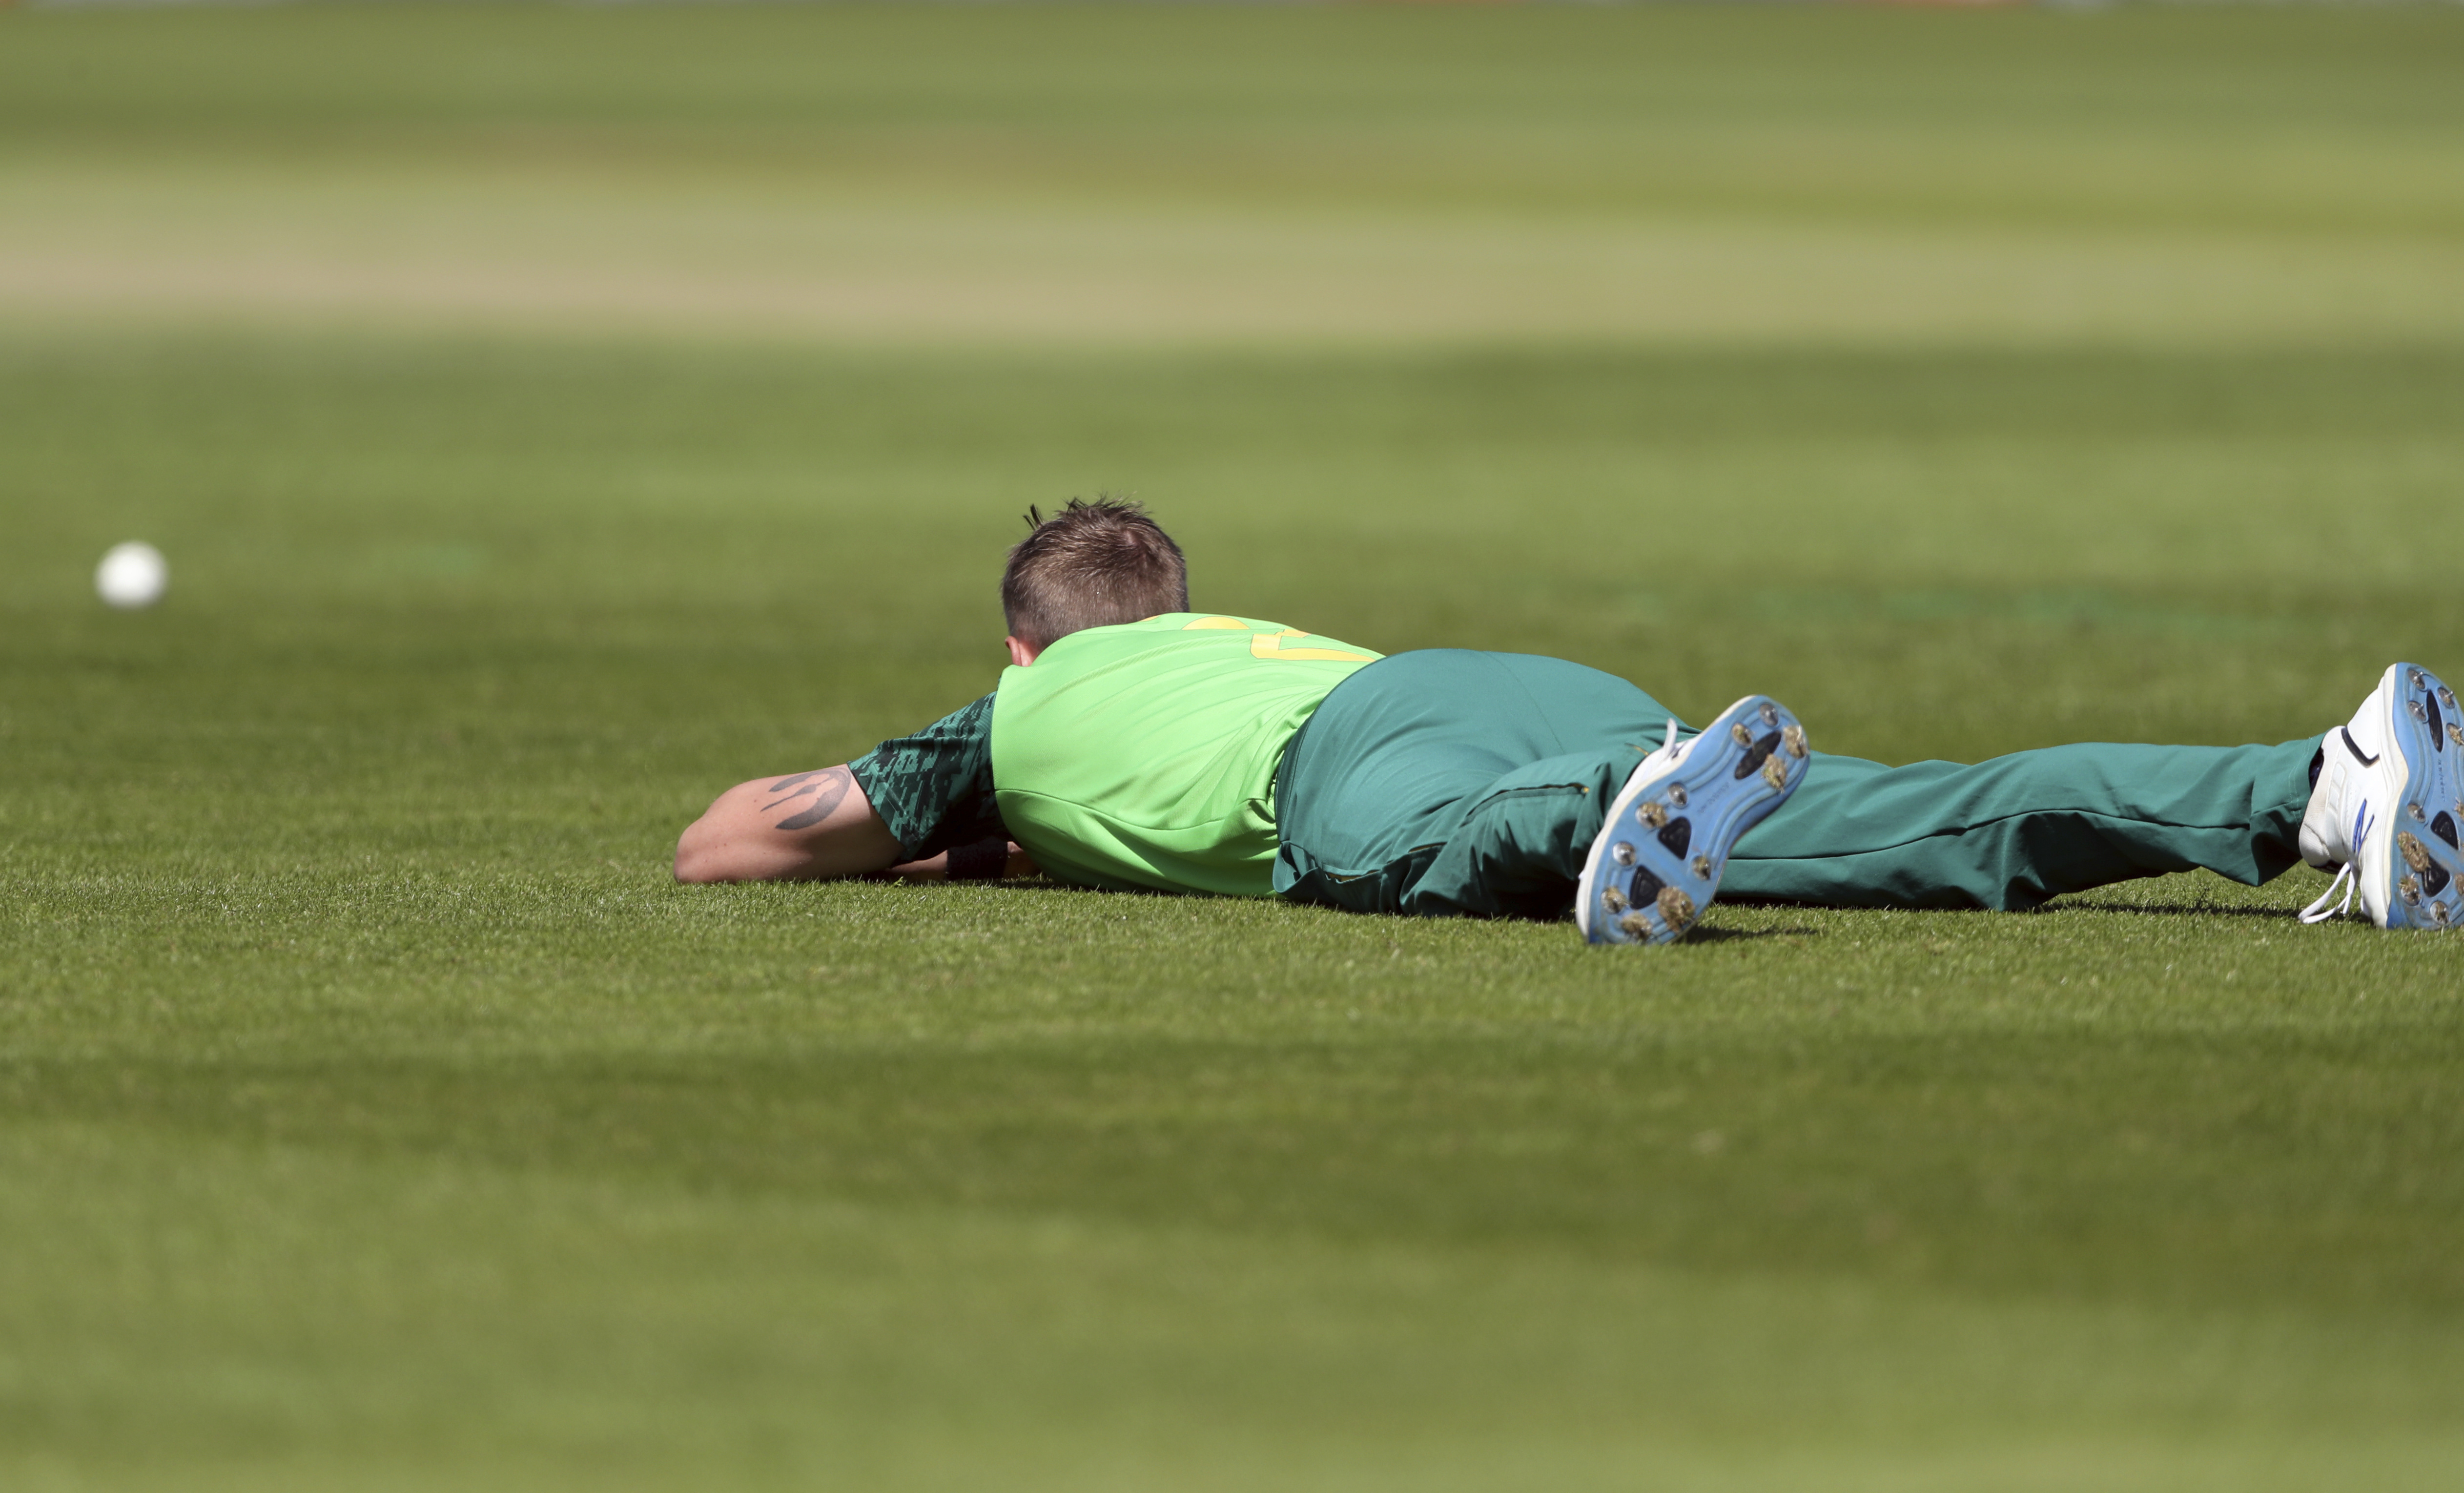 South Africa's bowler Chris Morris lies on the ground to avoid a swarm of bees that have come across the ground during the Cricket World Cup match between Sri Lanka and South Africa